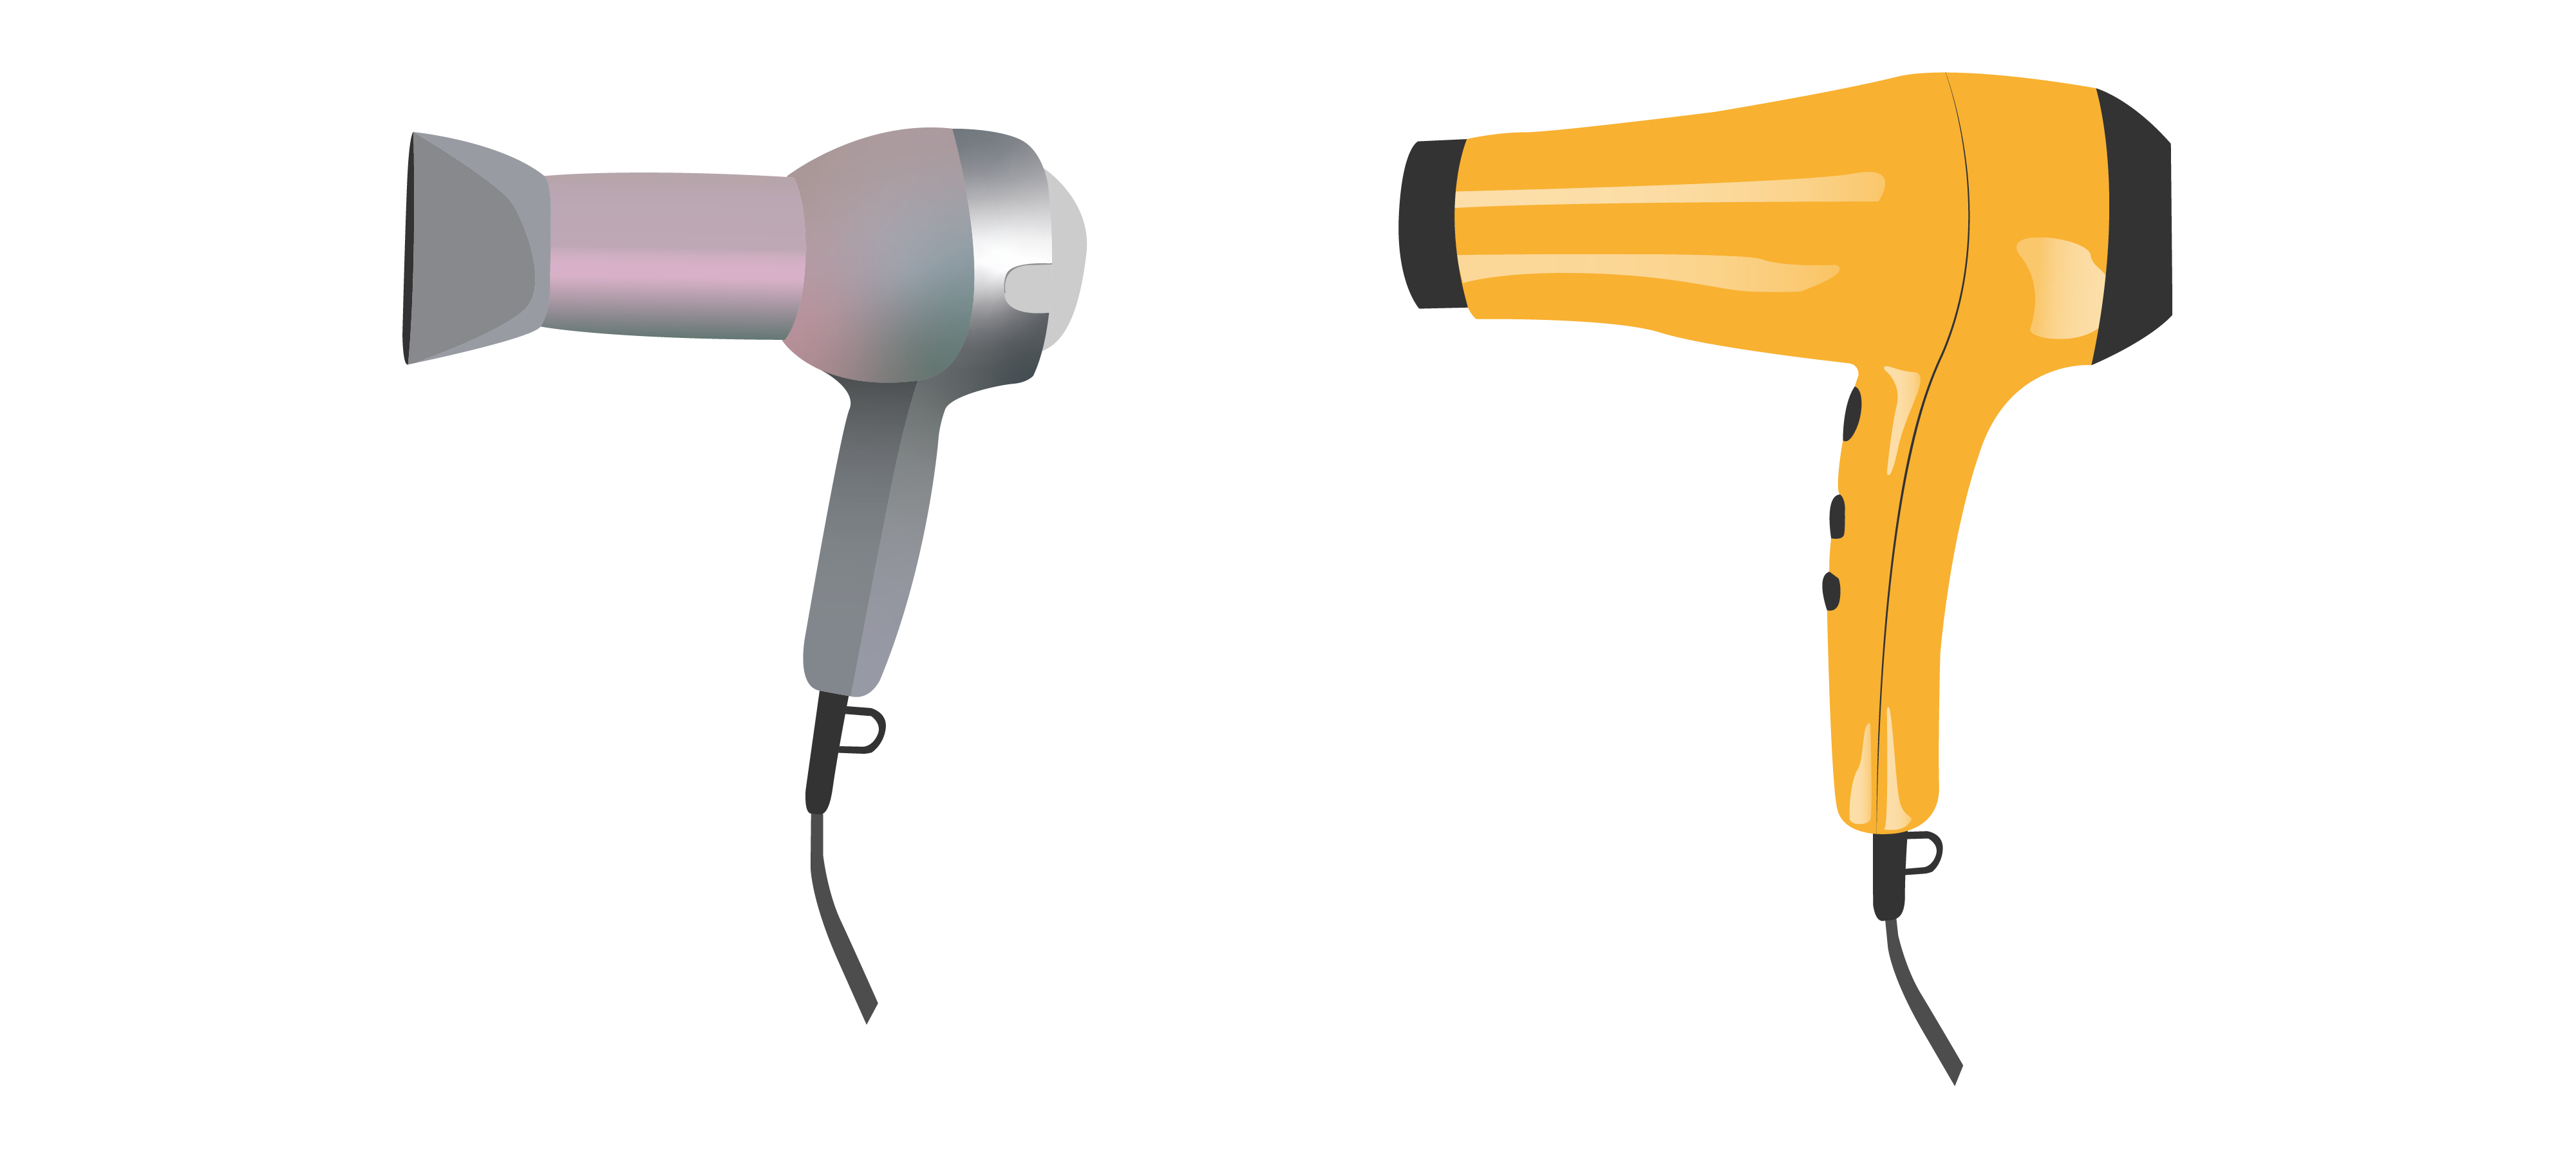 Two different hairdryers are shown. On the left, a pink and gray hairdryer on the left shows 7 or 8 distinct elements in its overall composition. On the right, a yellow and black hairdryer has elements that flow into one another and appear as a unified surface with 2 or 3 main differences between features.